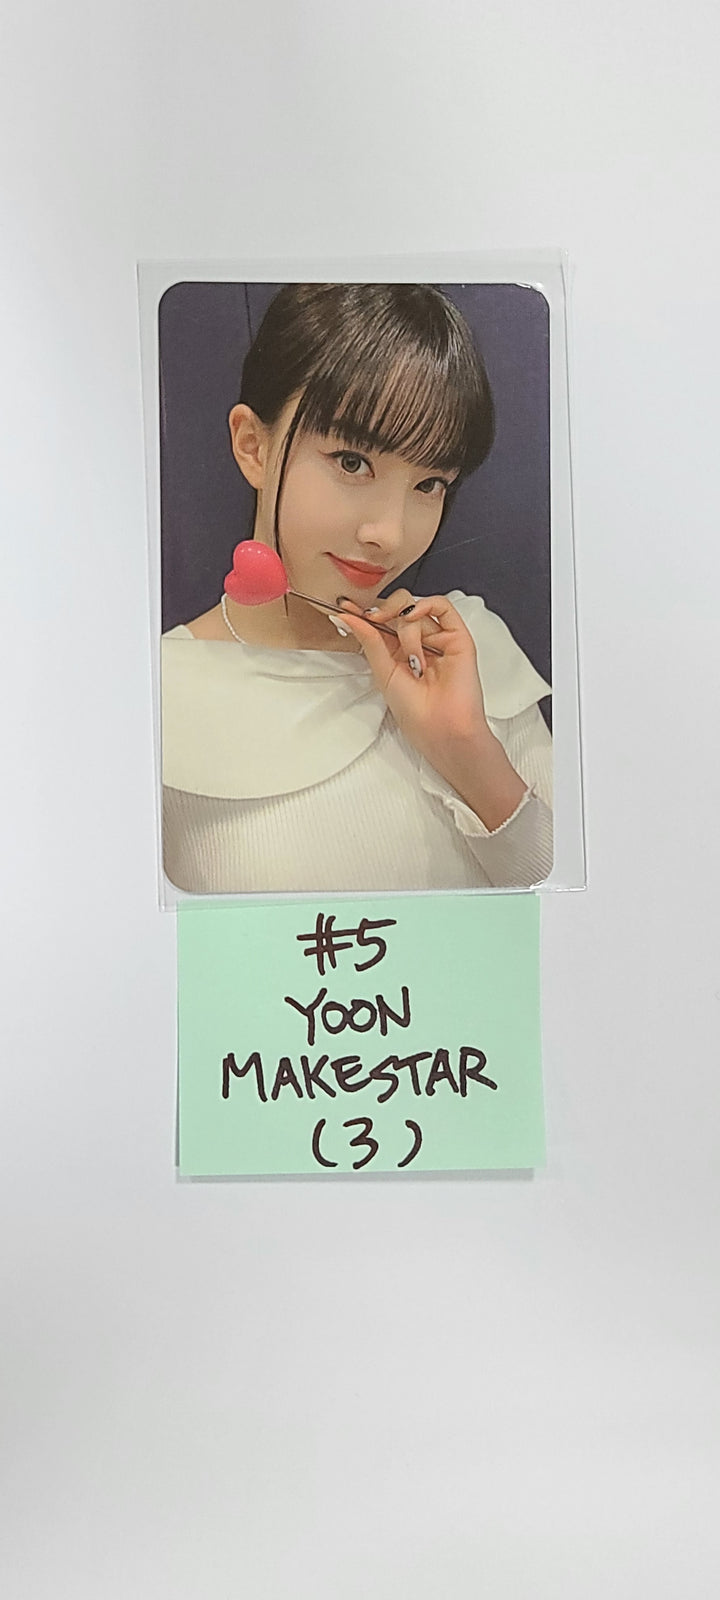 StayC 'YOUNG-LUV.COM' - Makestar Fansign Event Photocard Round 2